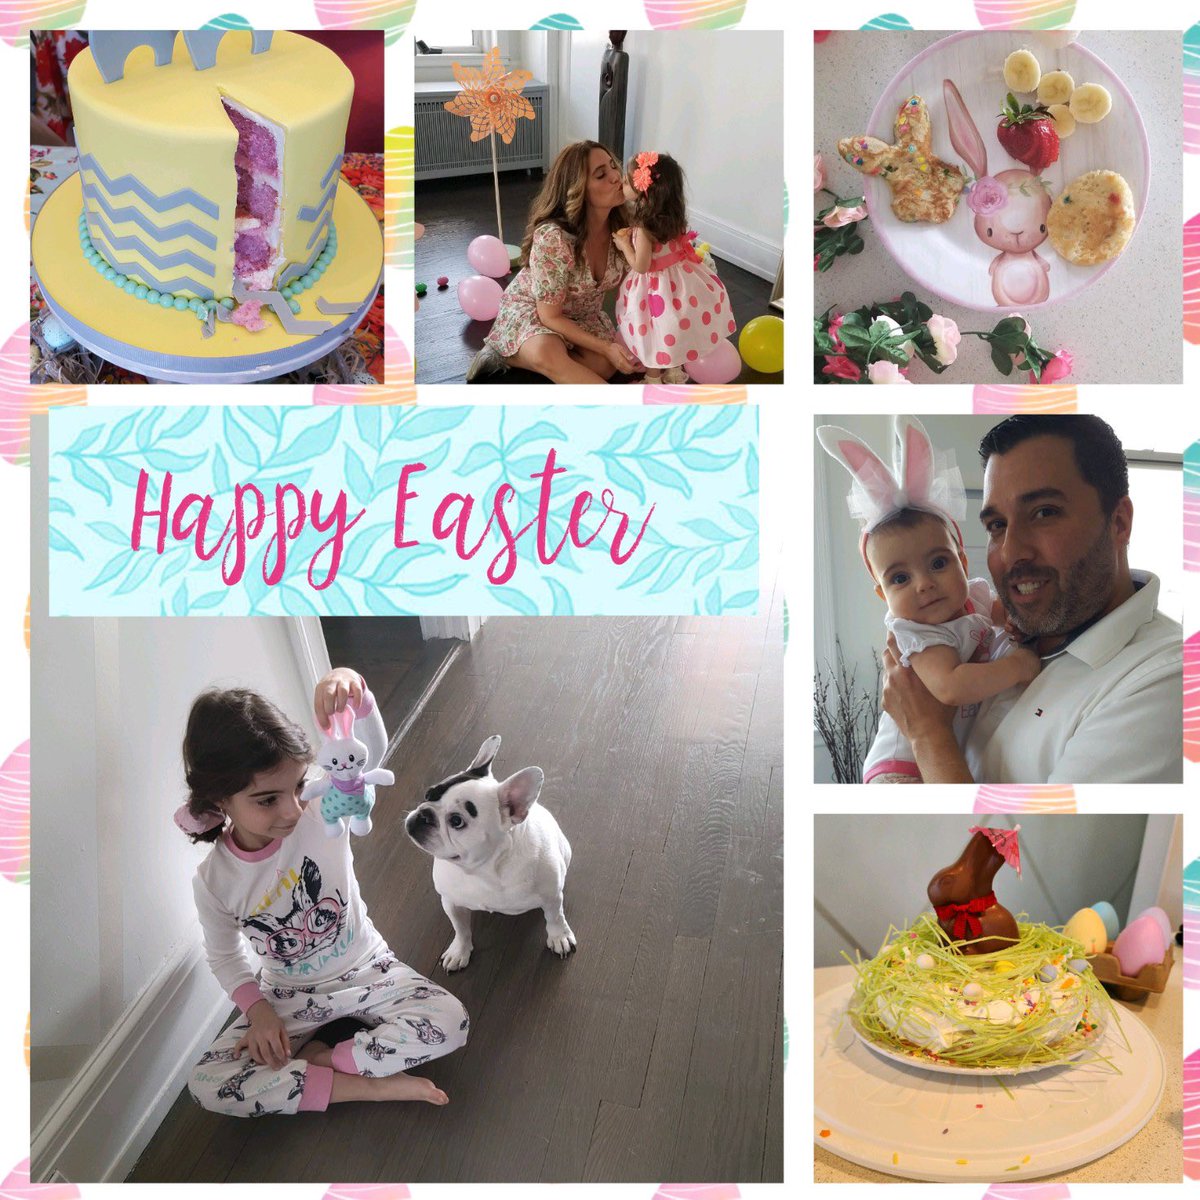 #HappyEaster everybunny! Always a special day over the years. May your day be filled with greatness, love and new memories. Felices Pascuas 🐰 🐣